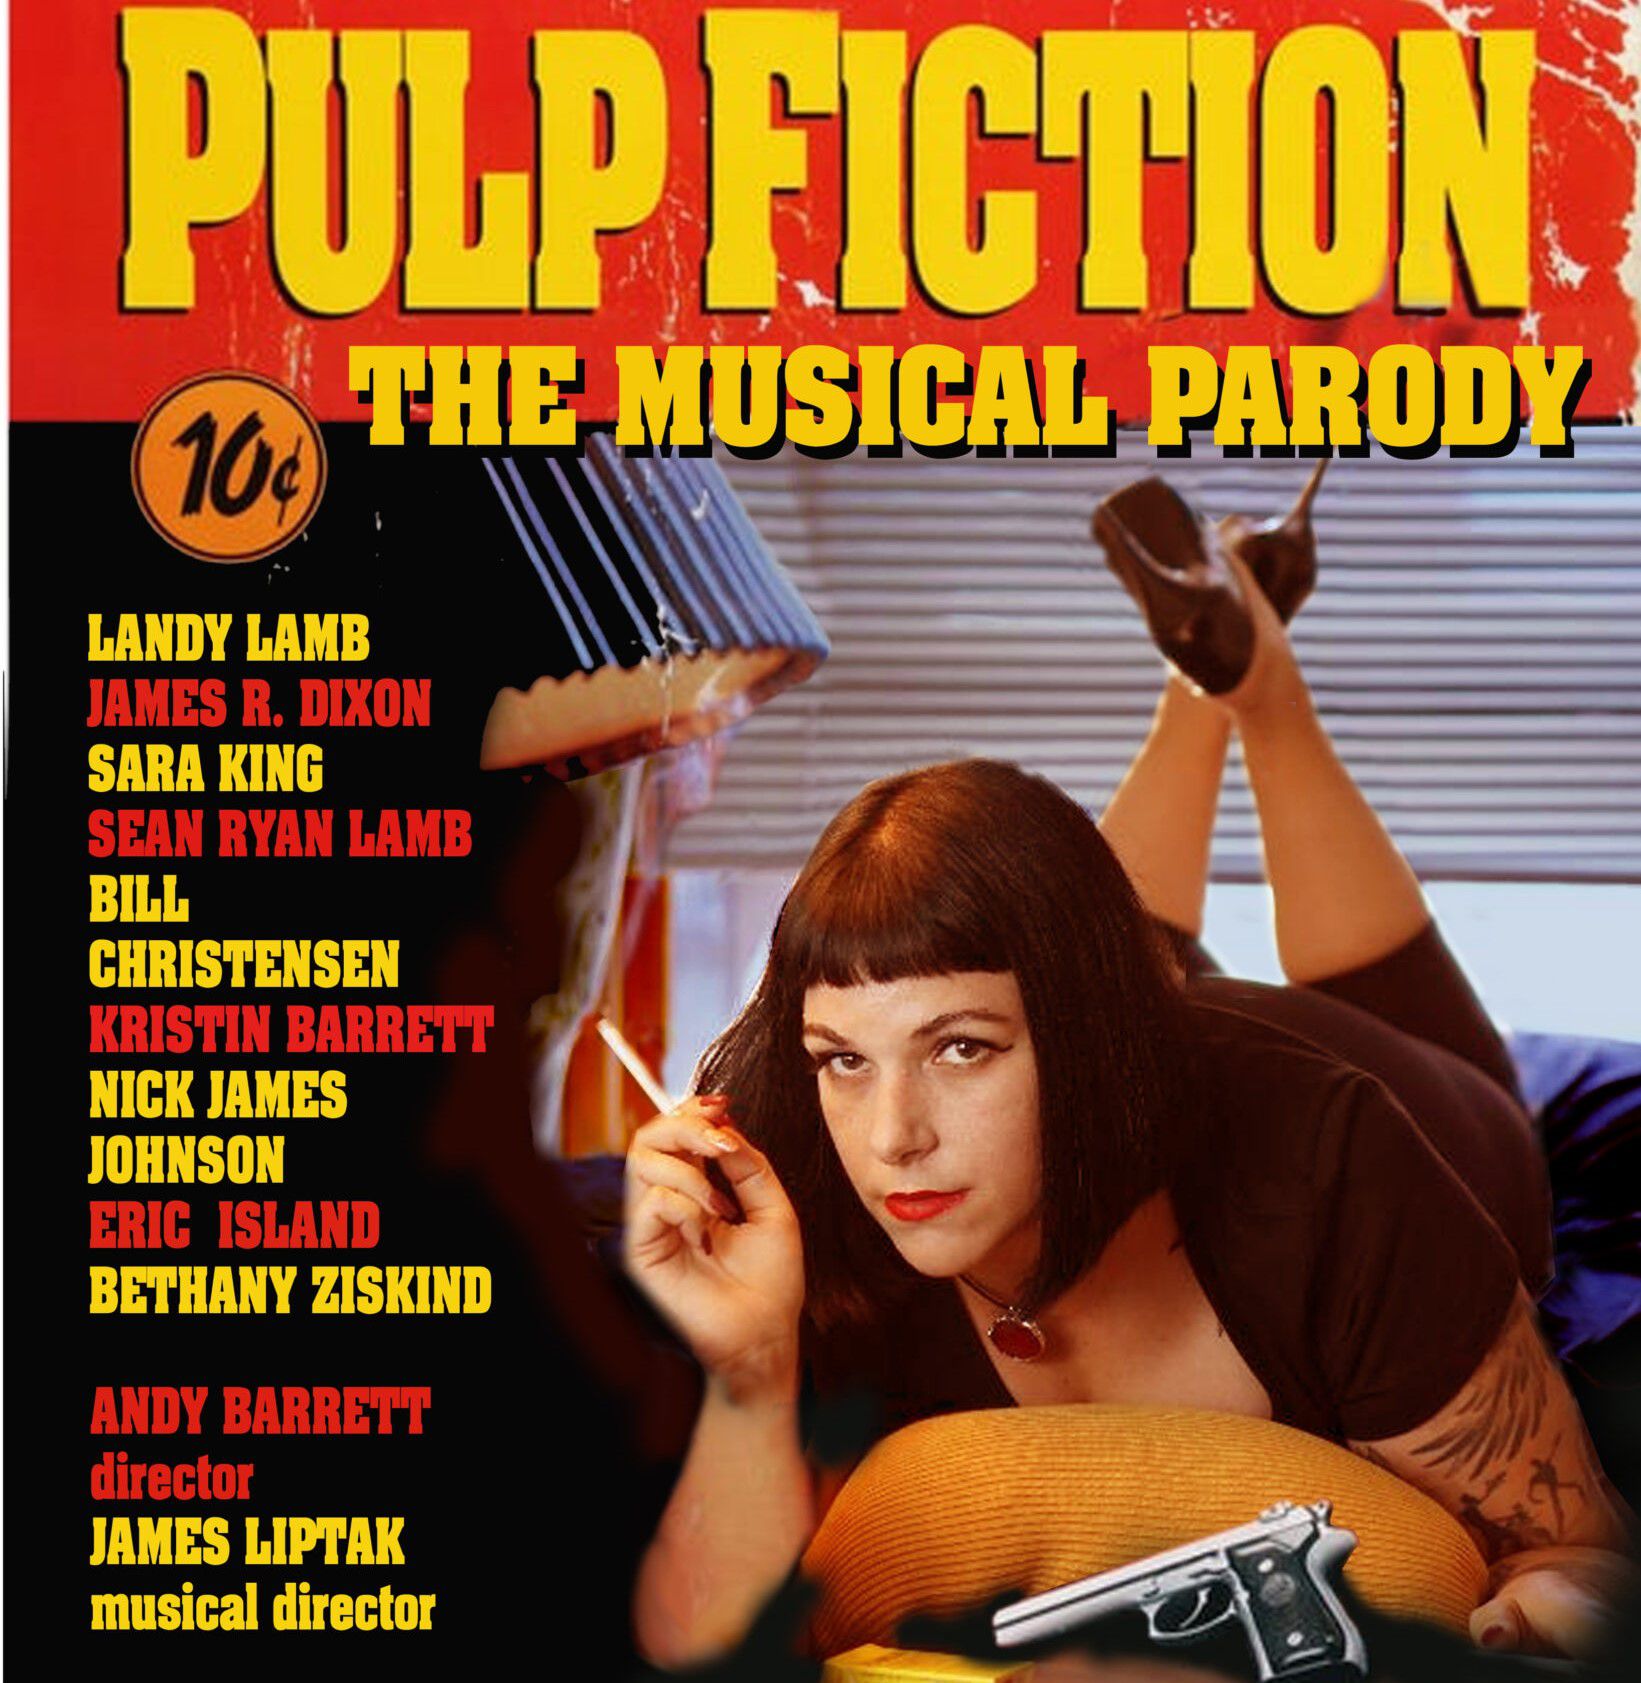 Stage production turns 'Pulp Fiction' into musical parody - OPB